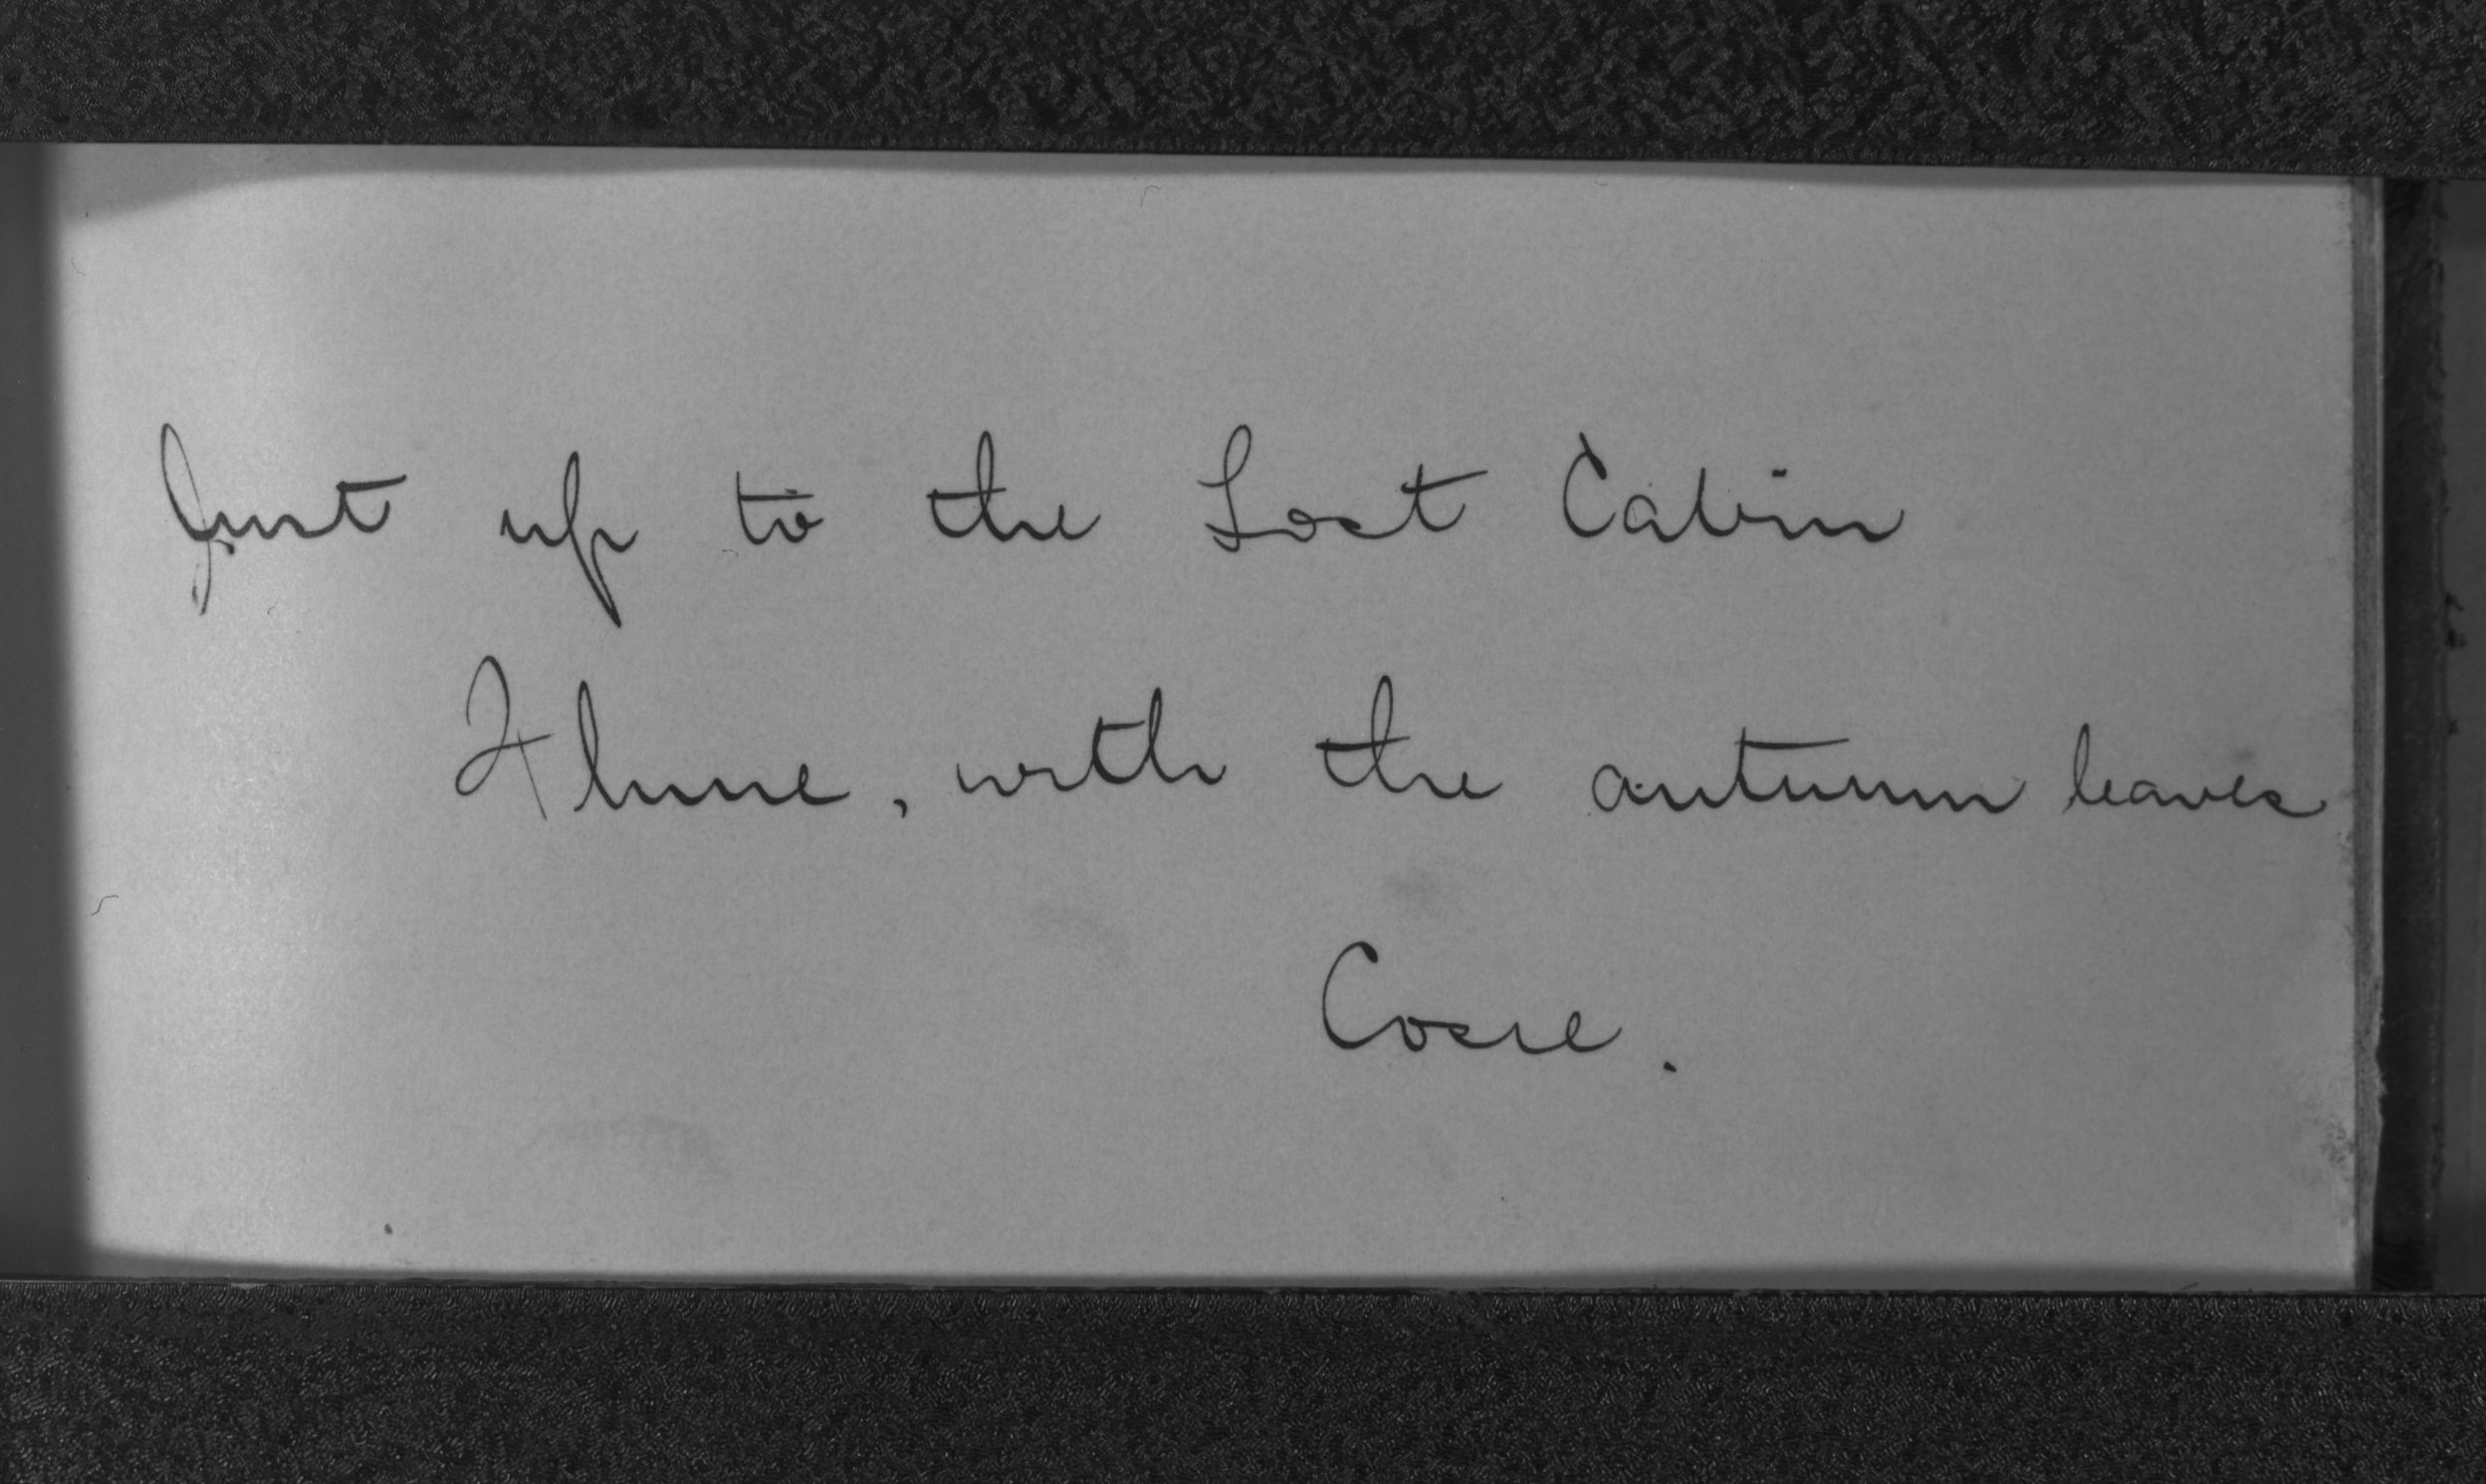 Autograph of Cosie Hutchings in the autograph book of Nellie & Dorothy Atkinson. Copied October 1980 by Michael Dixon.